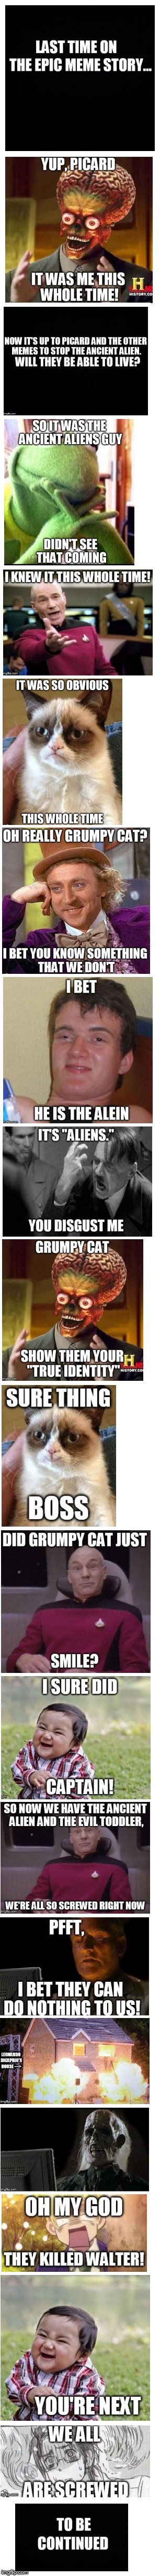 Epic Meme Story Part 2  | image tagged in aleins,picard,grumpy cat,evil toddler,england,austria | made w/ Imgflip meme maker